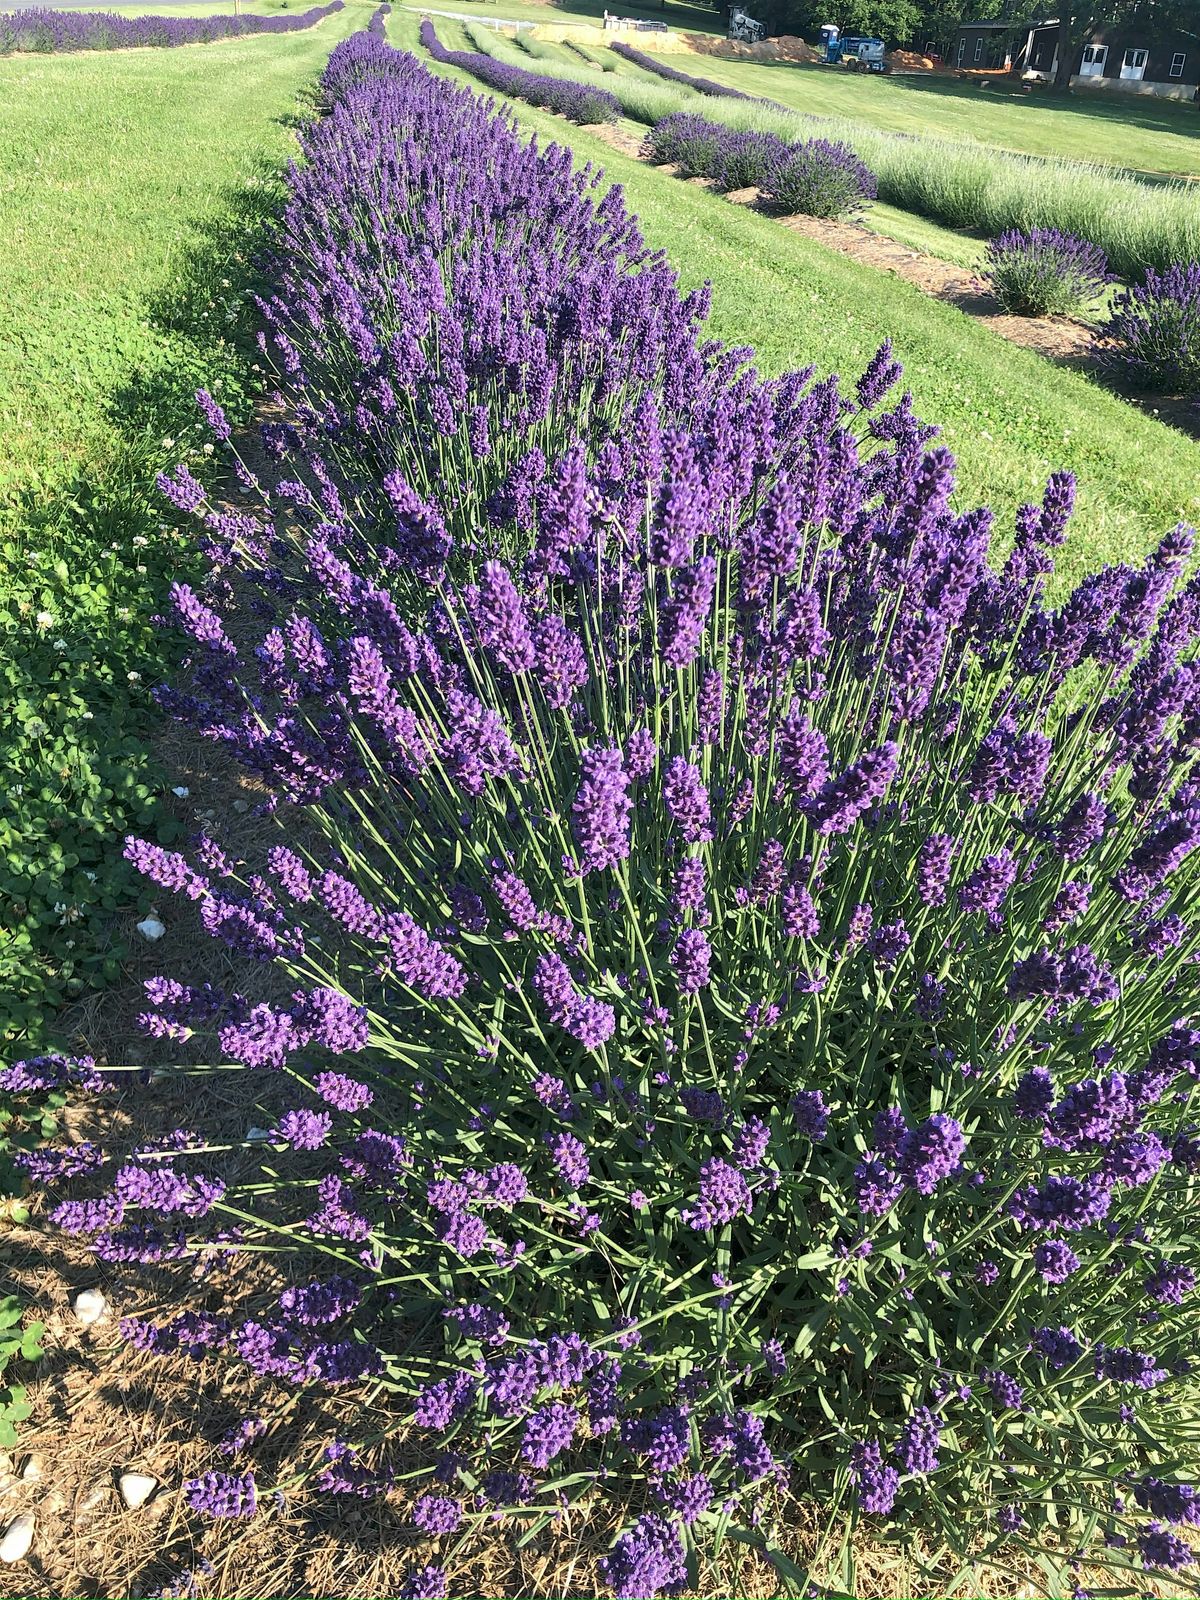 Lavender Festival: An Immersive Journey of Flavors, Aromas, and DIY